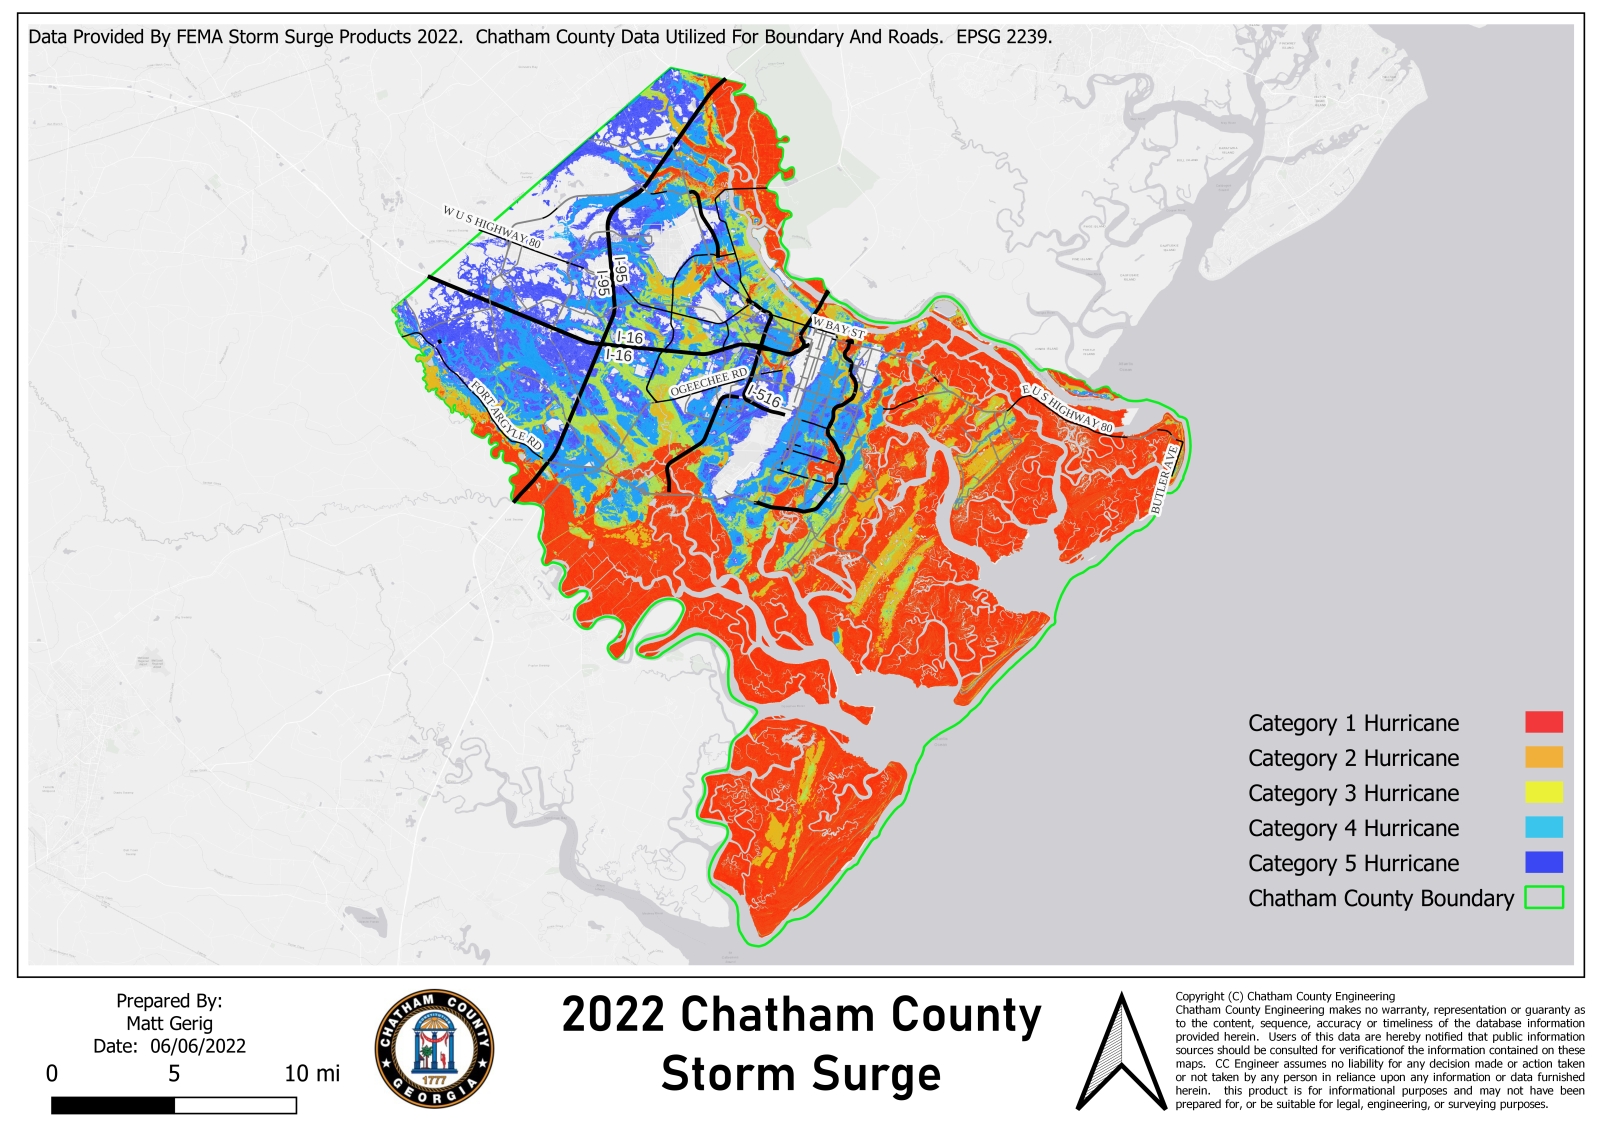 2022 Chatham County Storm Surge Map